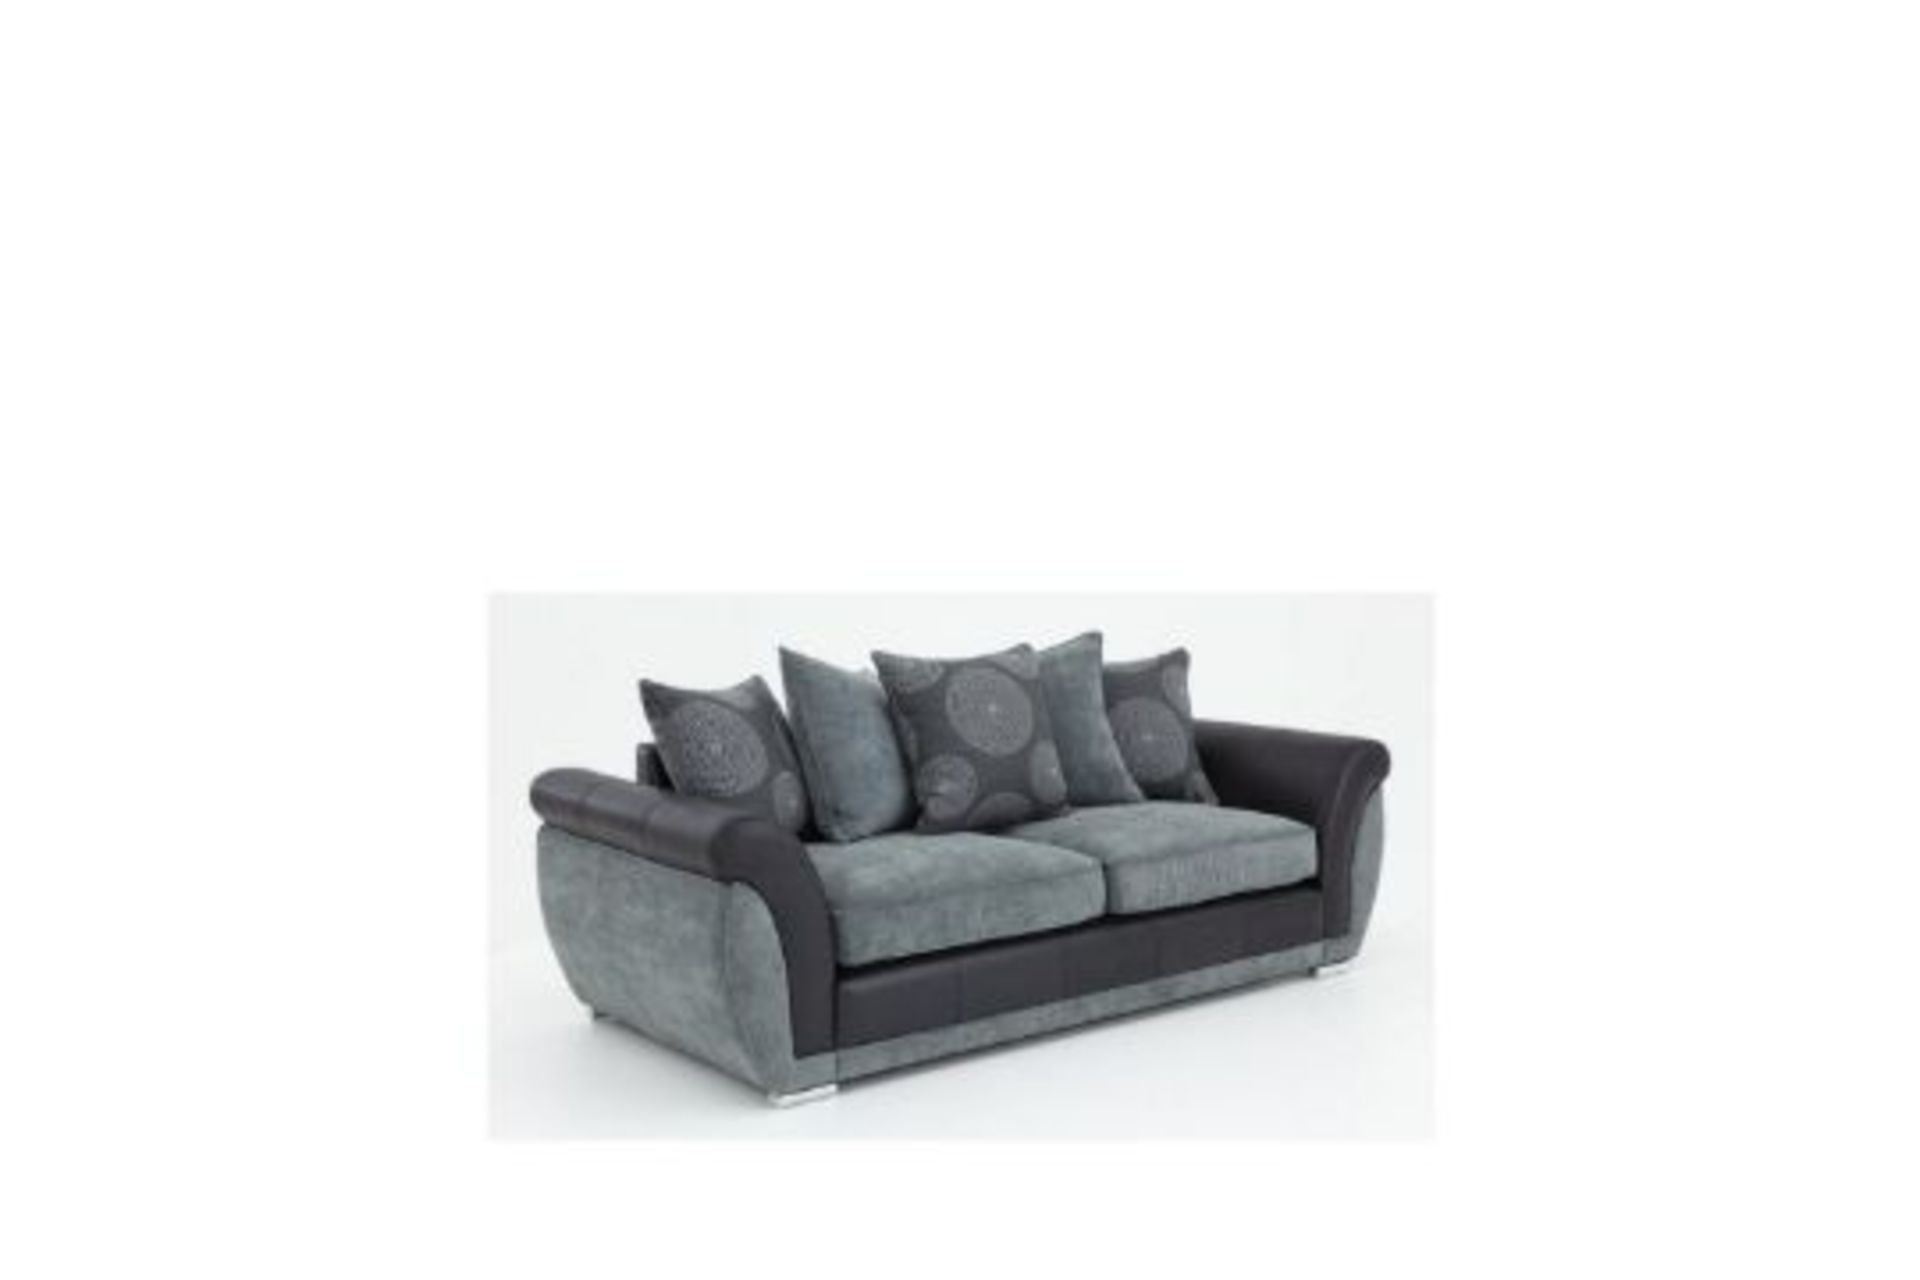 Danube 3 Seater Sofa. BLACK/GREY RPP £649.00. 90 x 219 x 94 cm, Fashionable Soft woven upholstery - Image 3 of 3